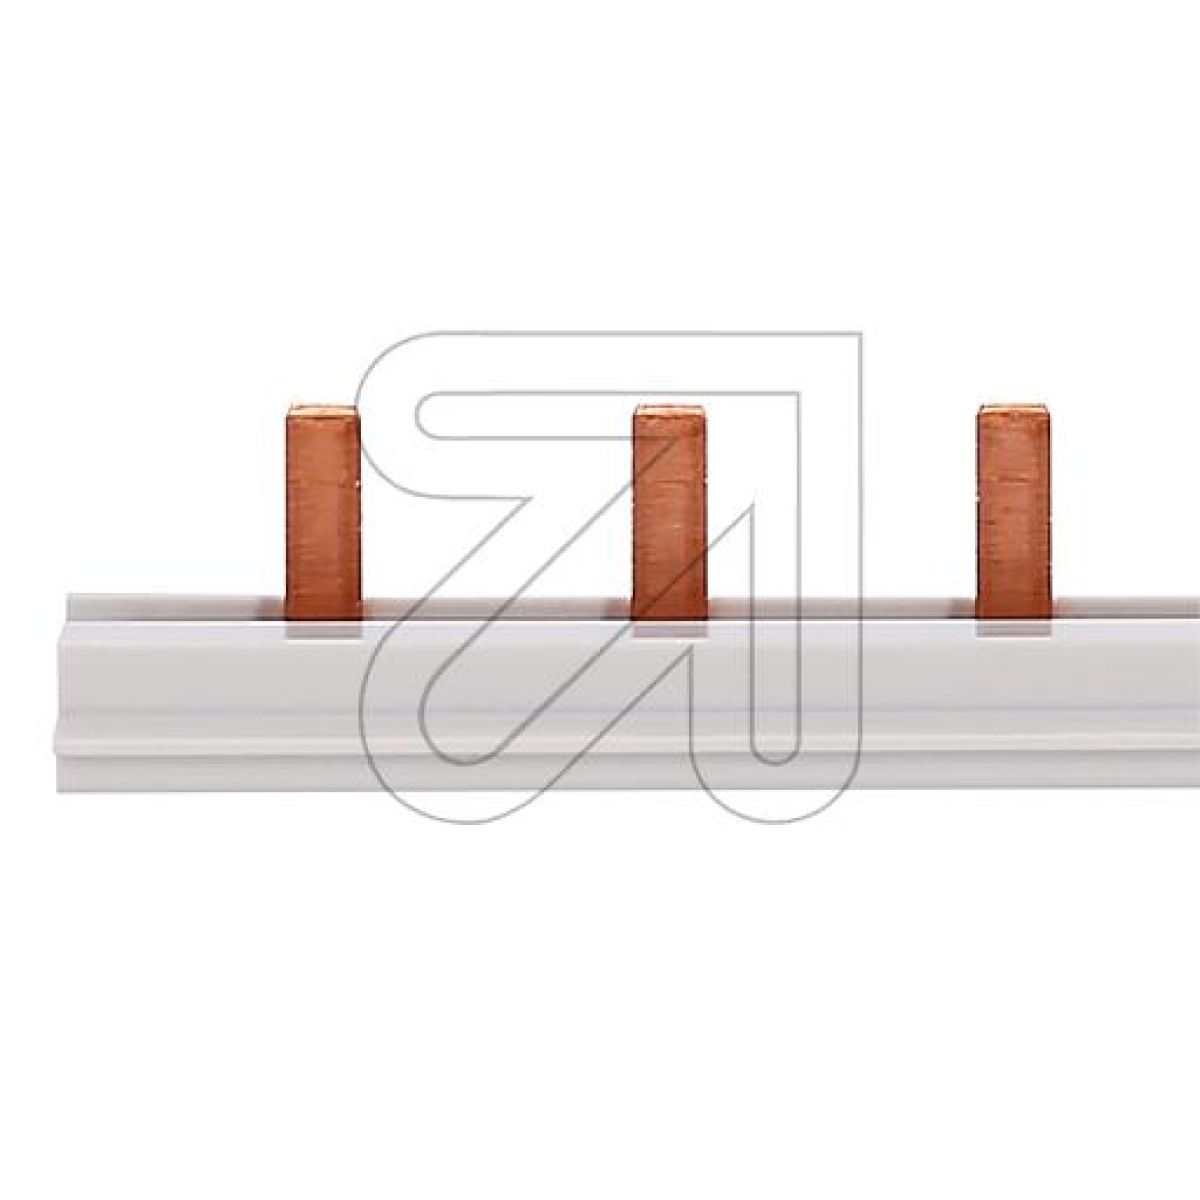 ABBBusbars PS 1/12 211mm 12 1-poleArticle-No: 180765